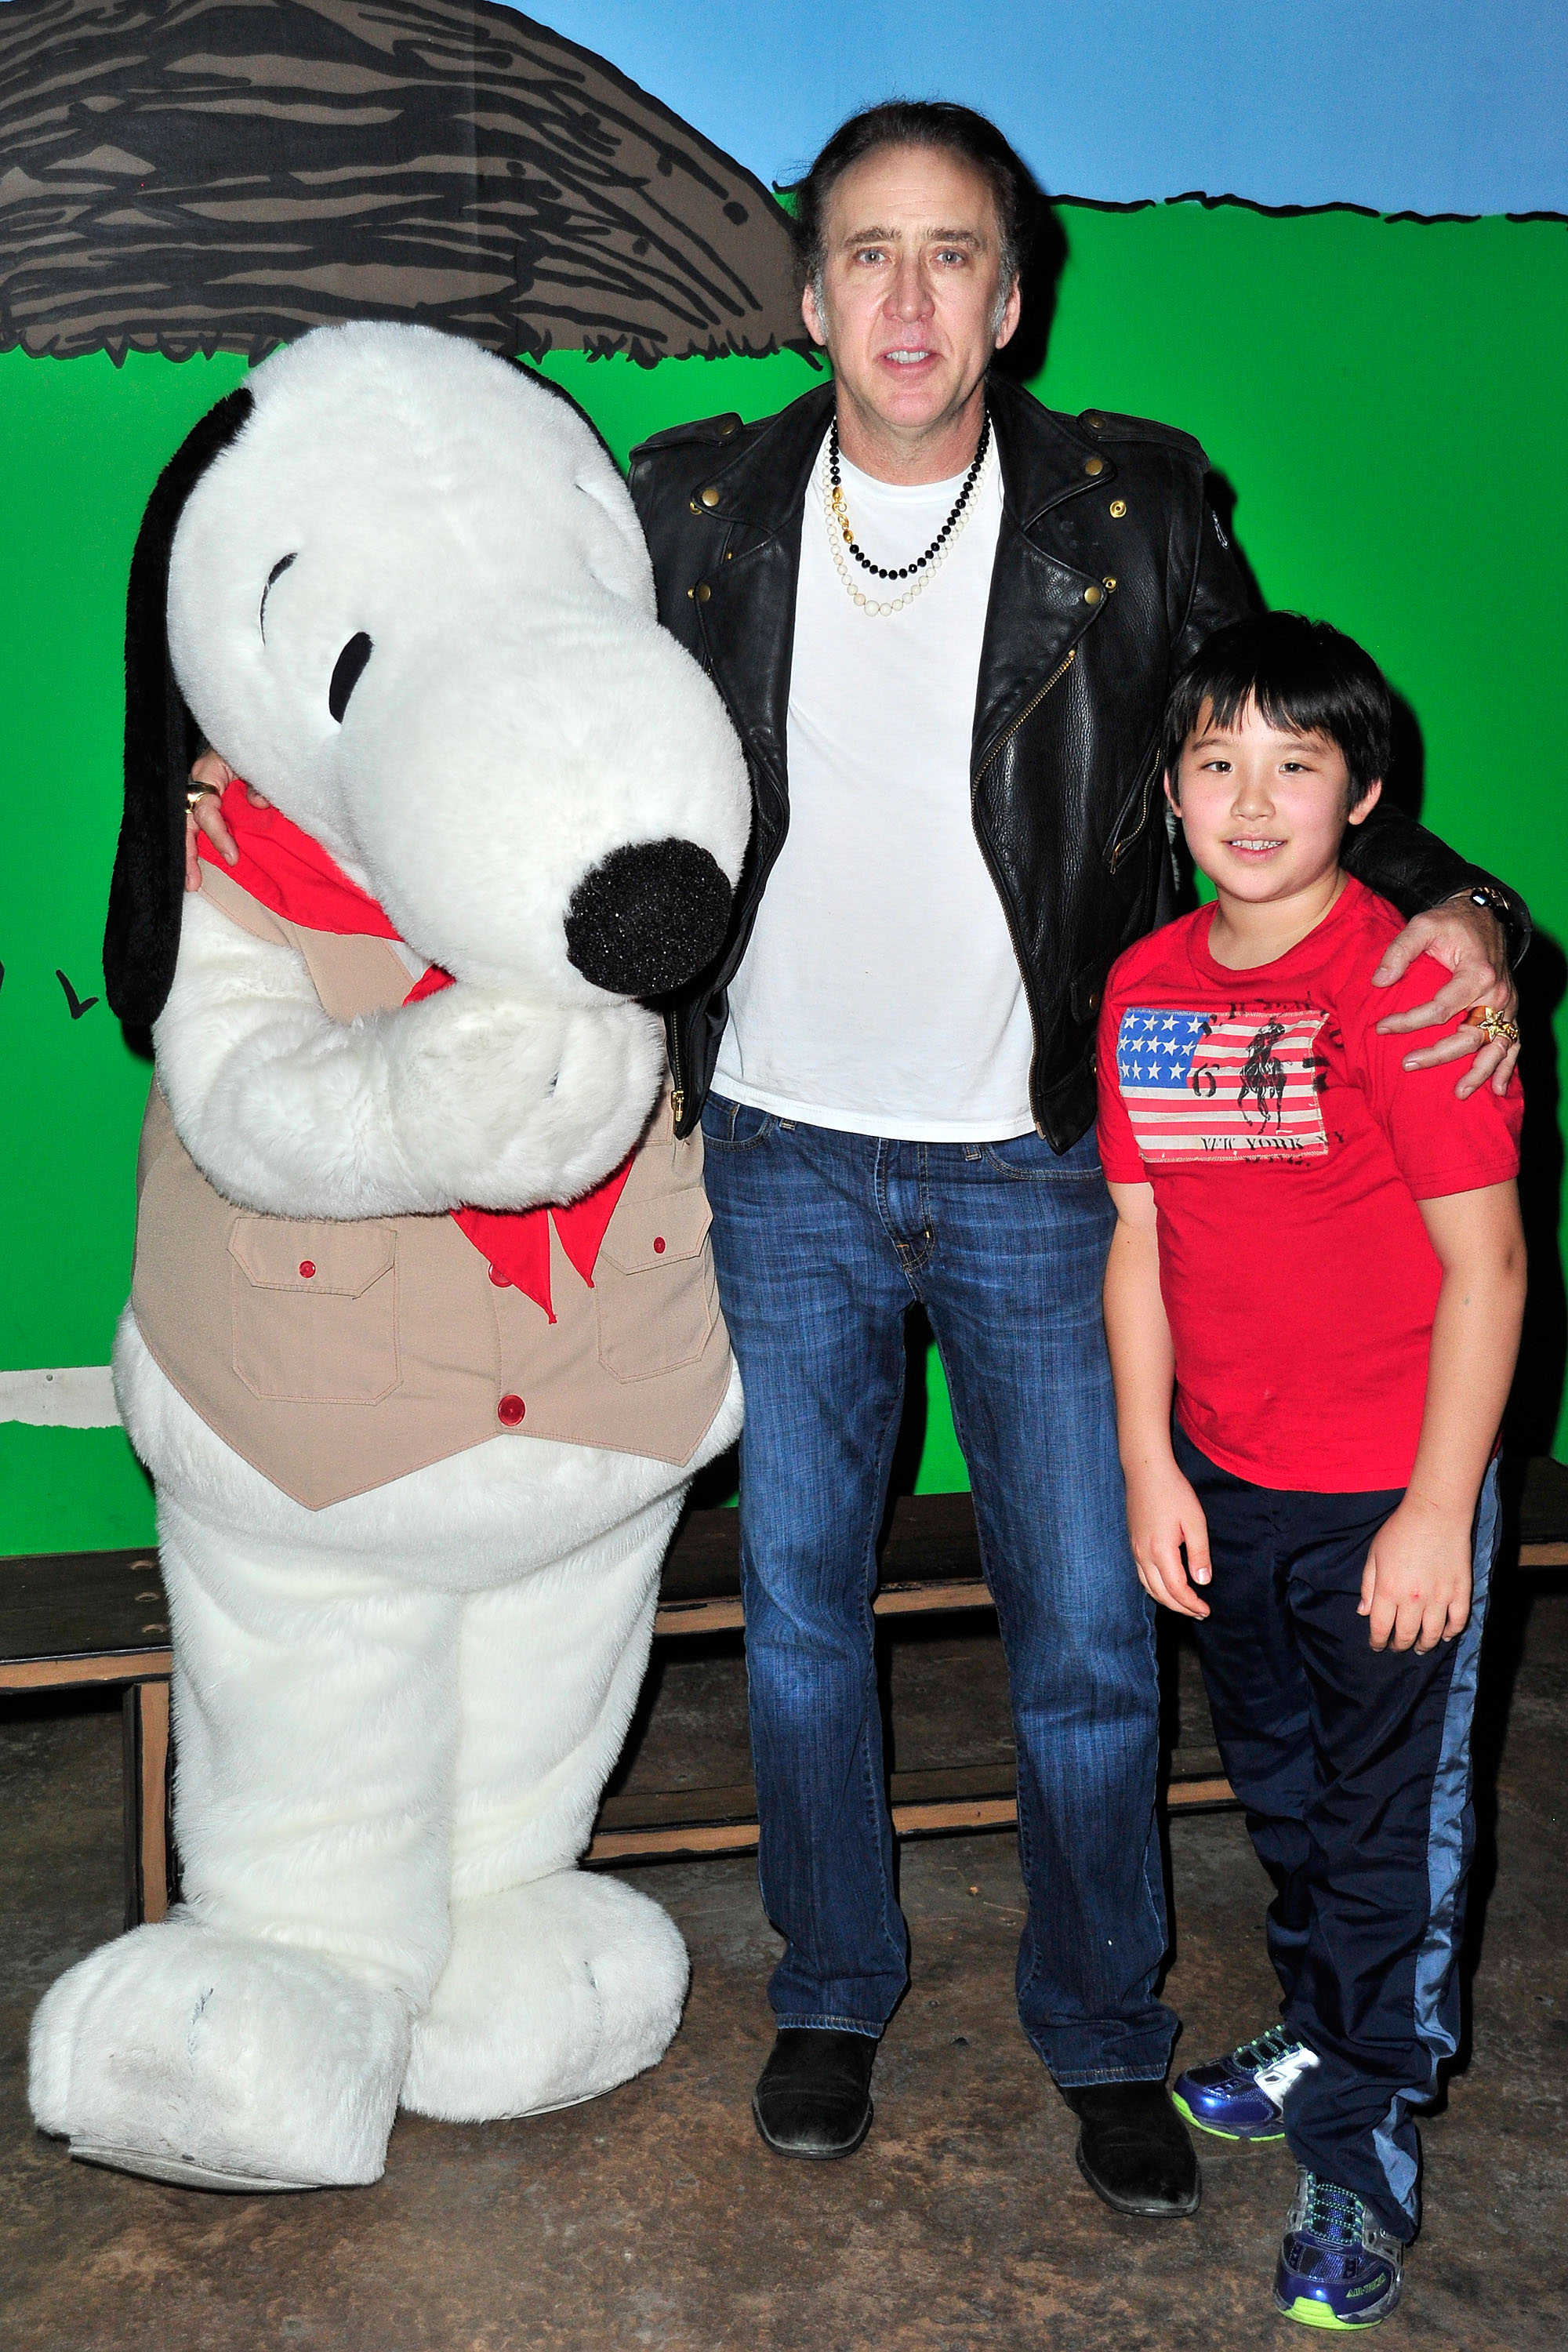 Nicolas Cage and his son Kal-El Cage visit Knott's Berry Farm on September 12, 2015, in Buena Park, California | Source: Getty Images